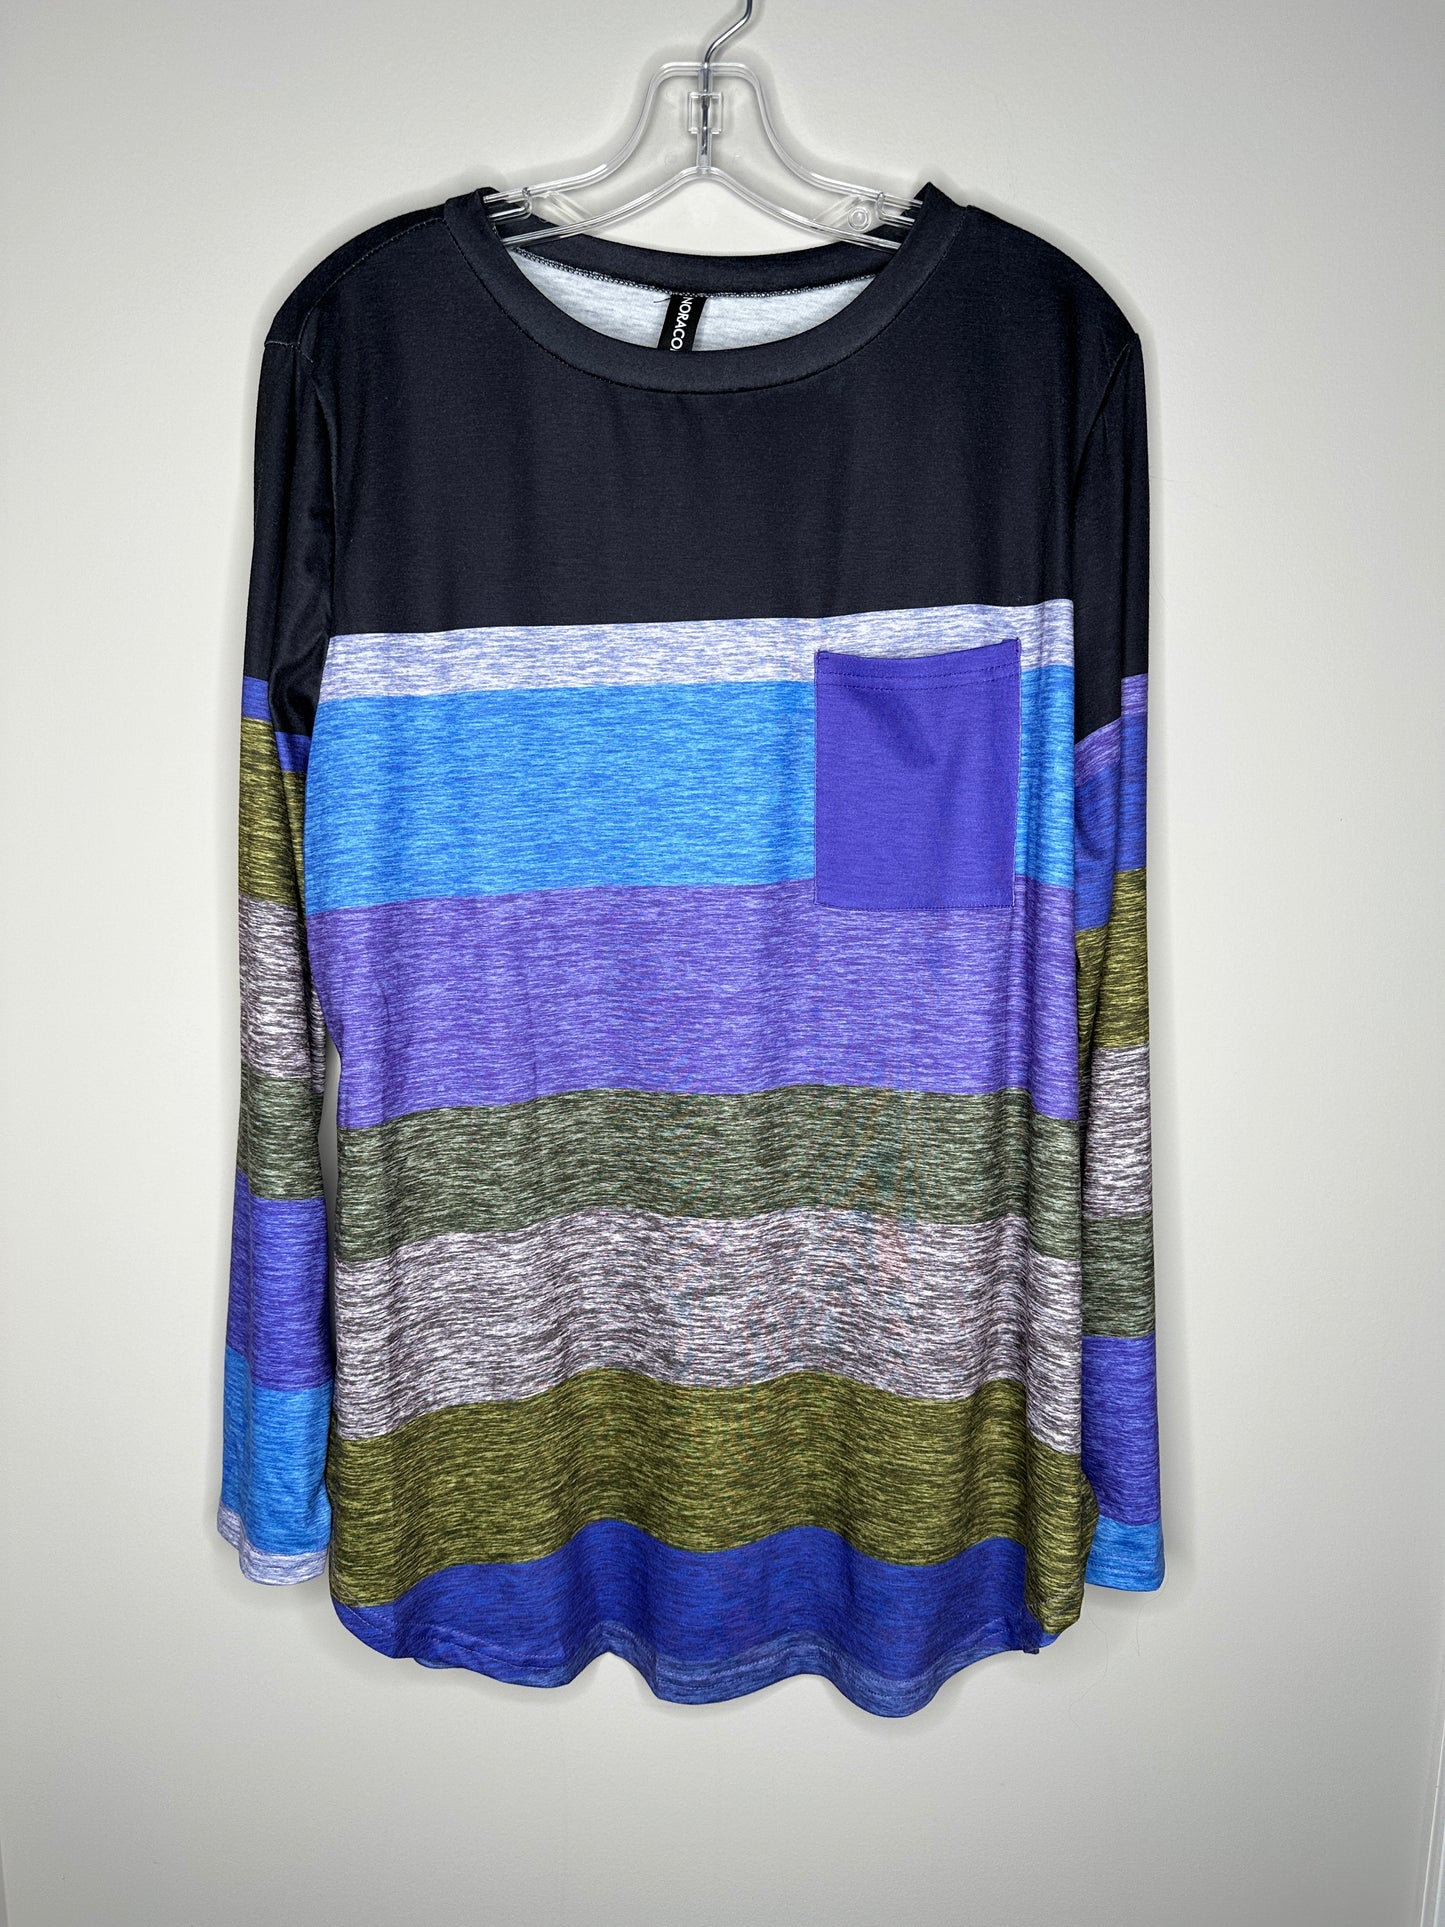 Noracora Size XXL (16) Multi-Colored Striped Long Sleeve Tunic Top, new/NWOT